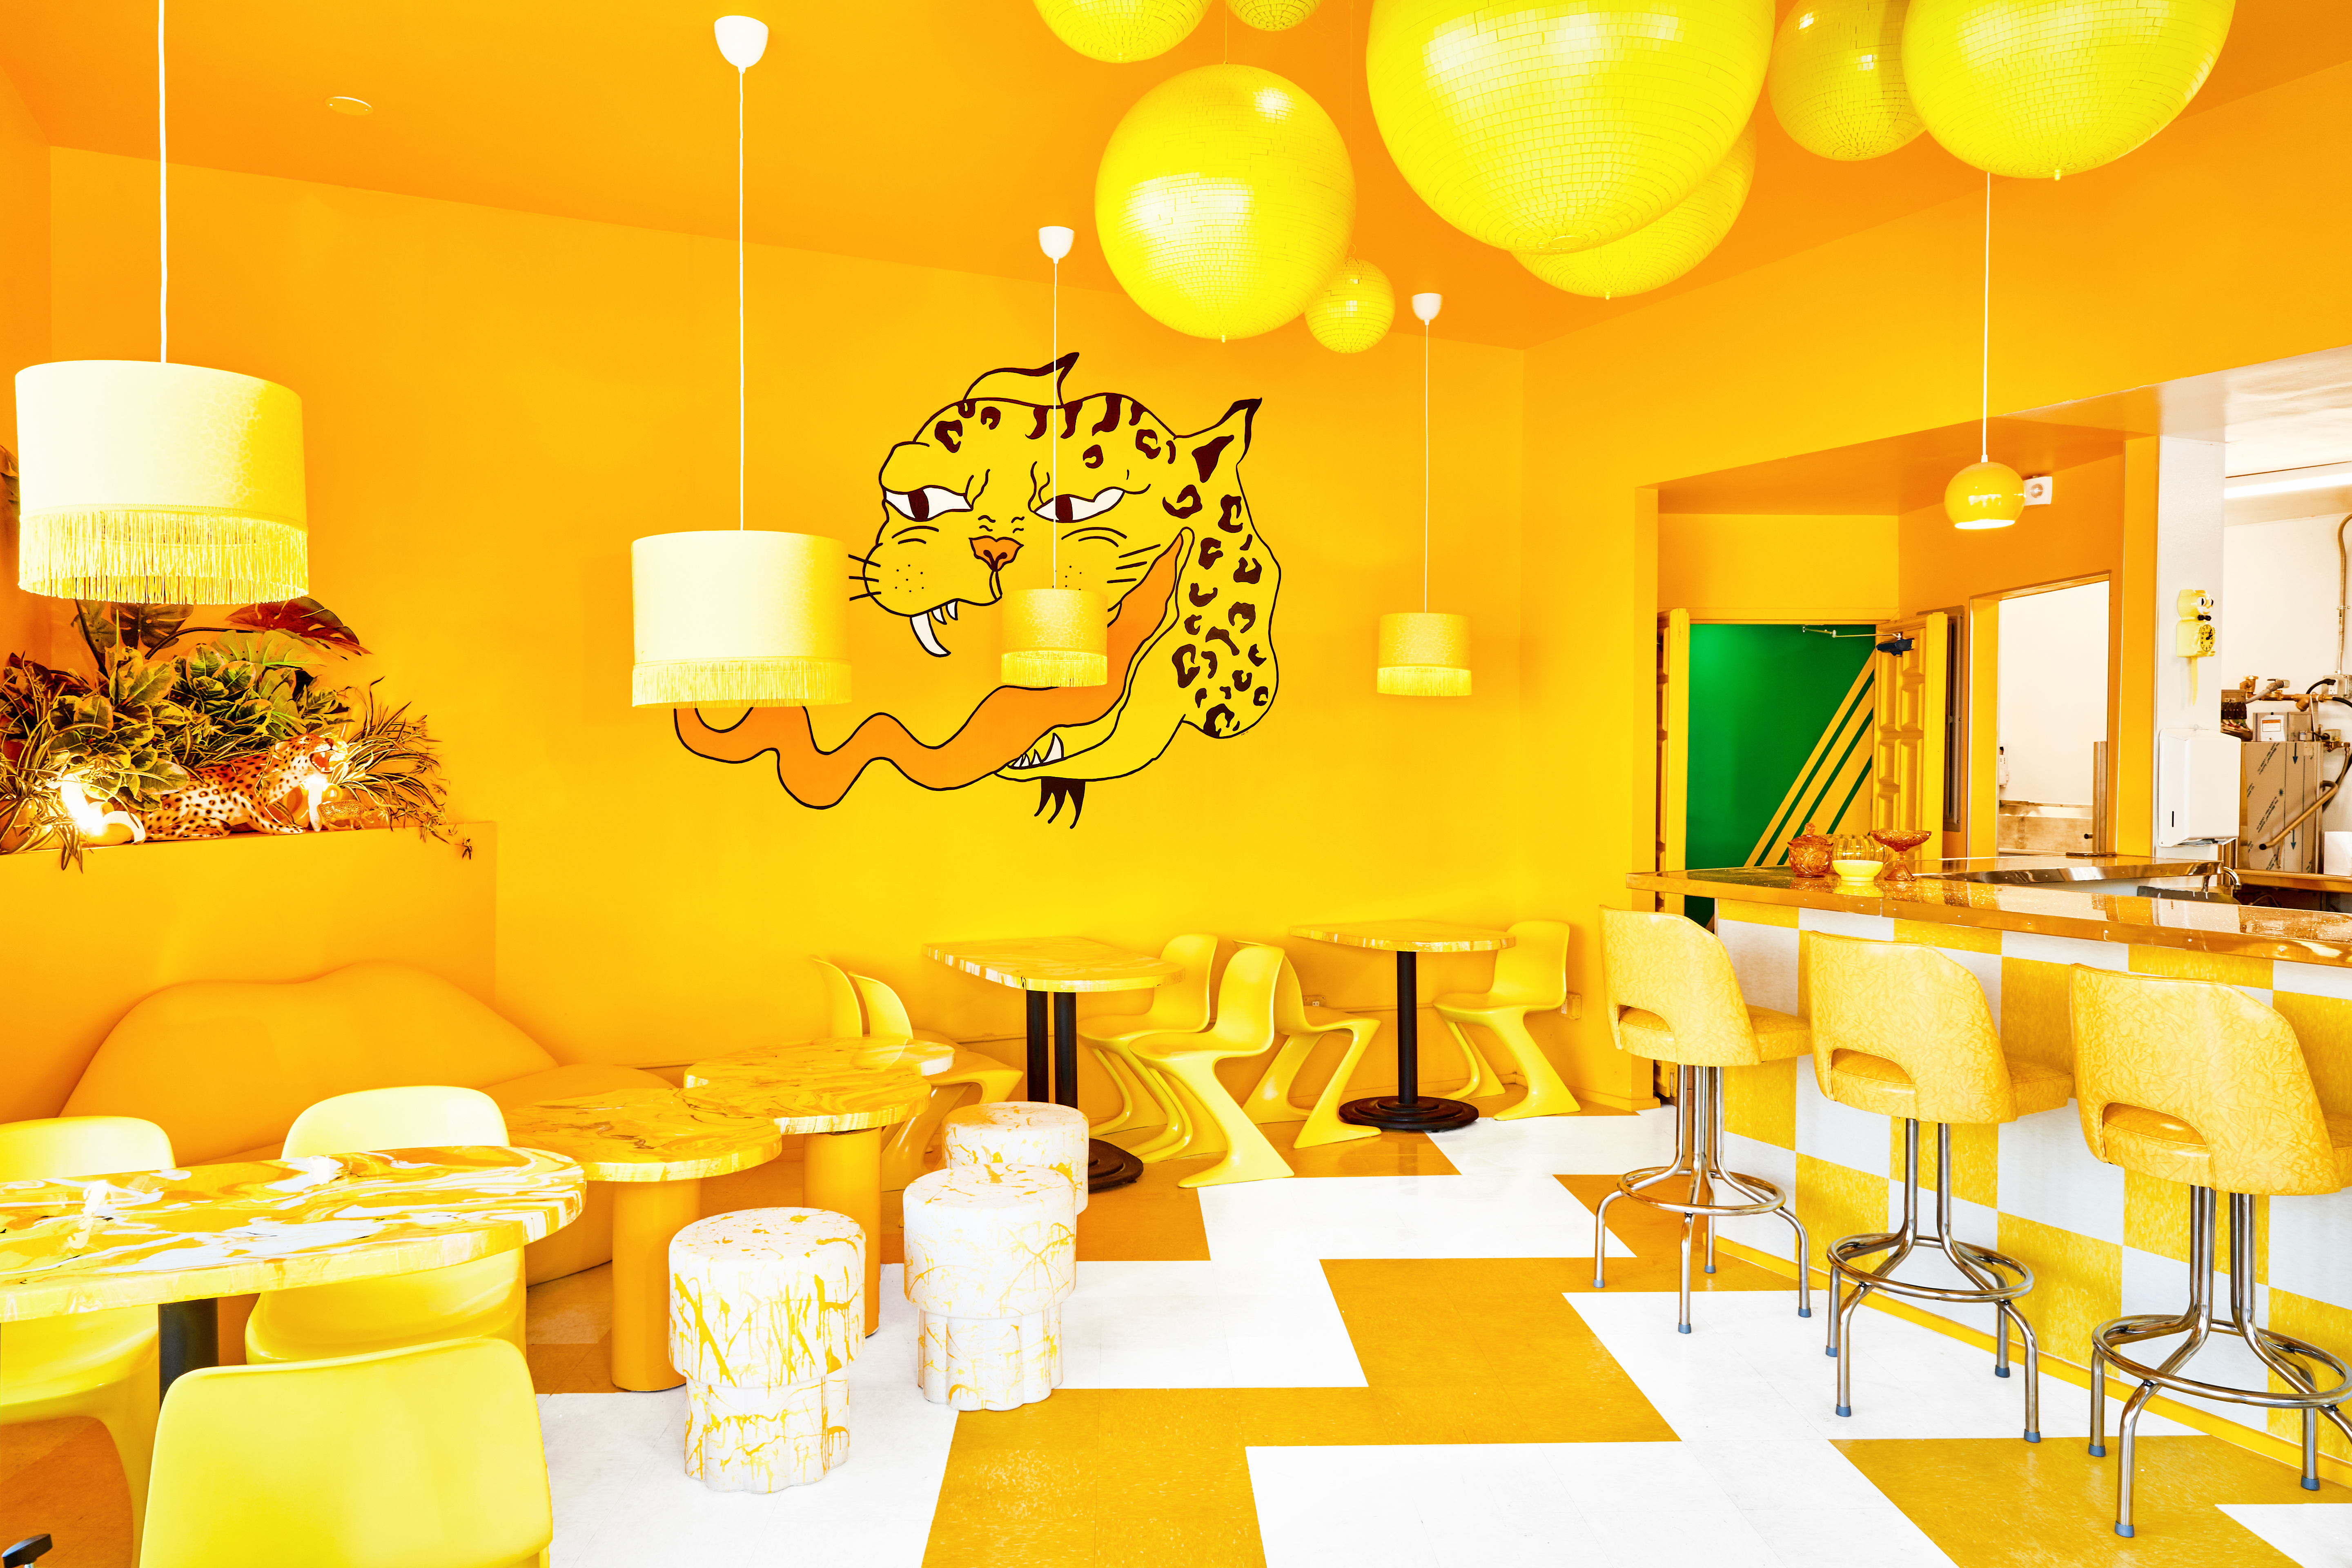 The monochromatic yellow dining room at Shuggie’s with a cheetah mural on the back wall.